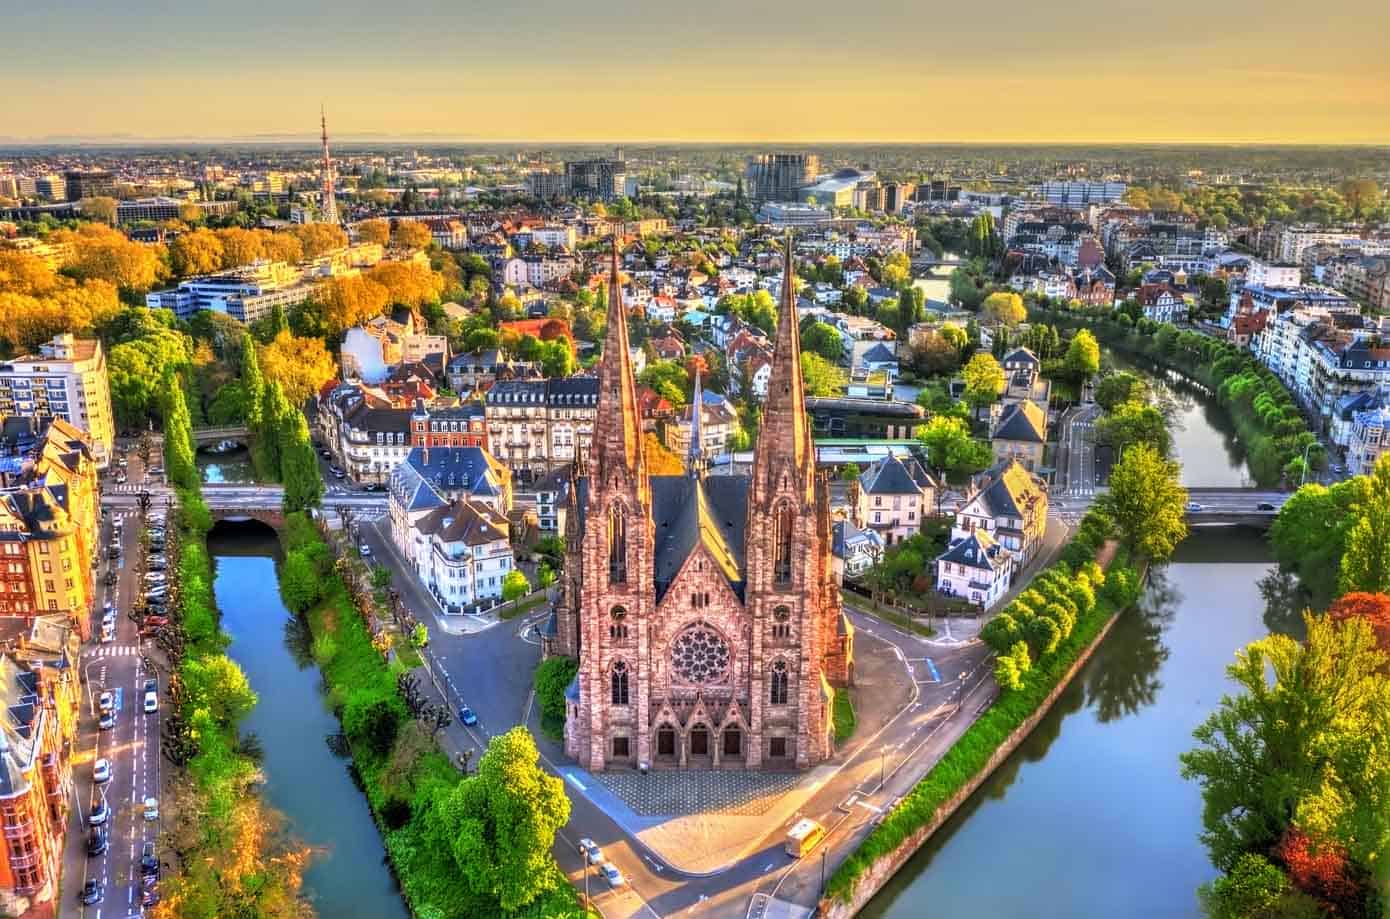 View of city, canal, and Saint Paul Church in Strasbourg, Alsace, France.